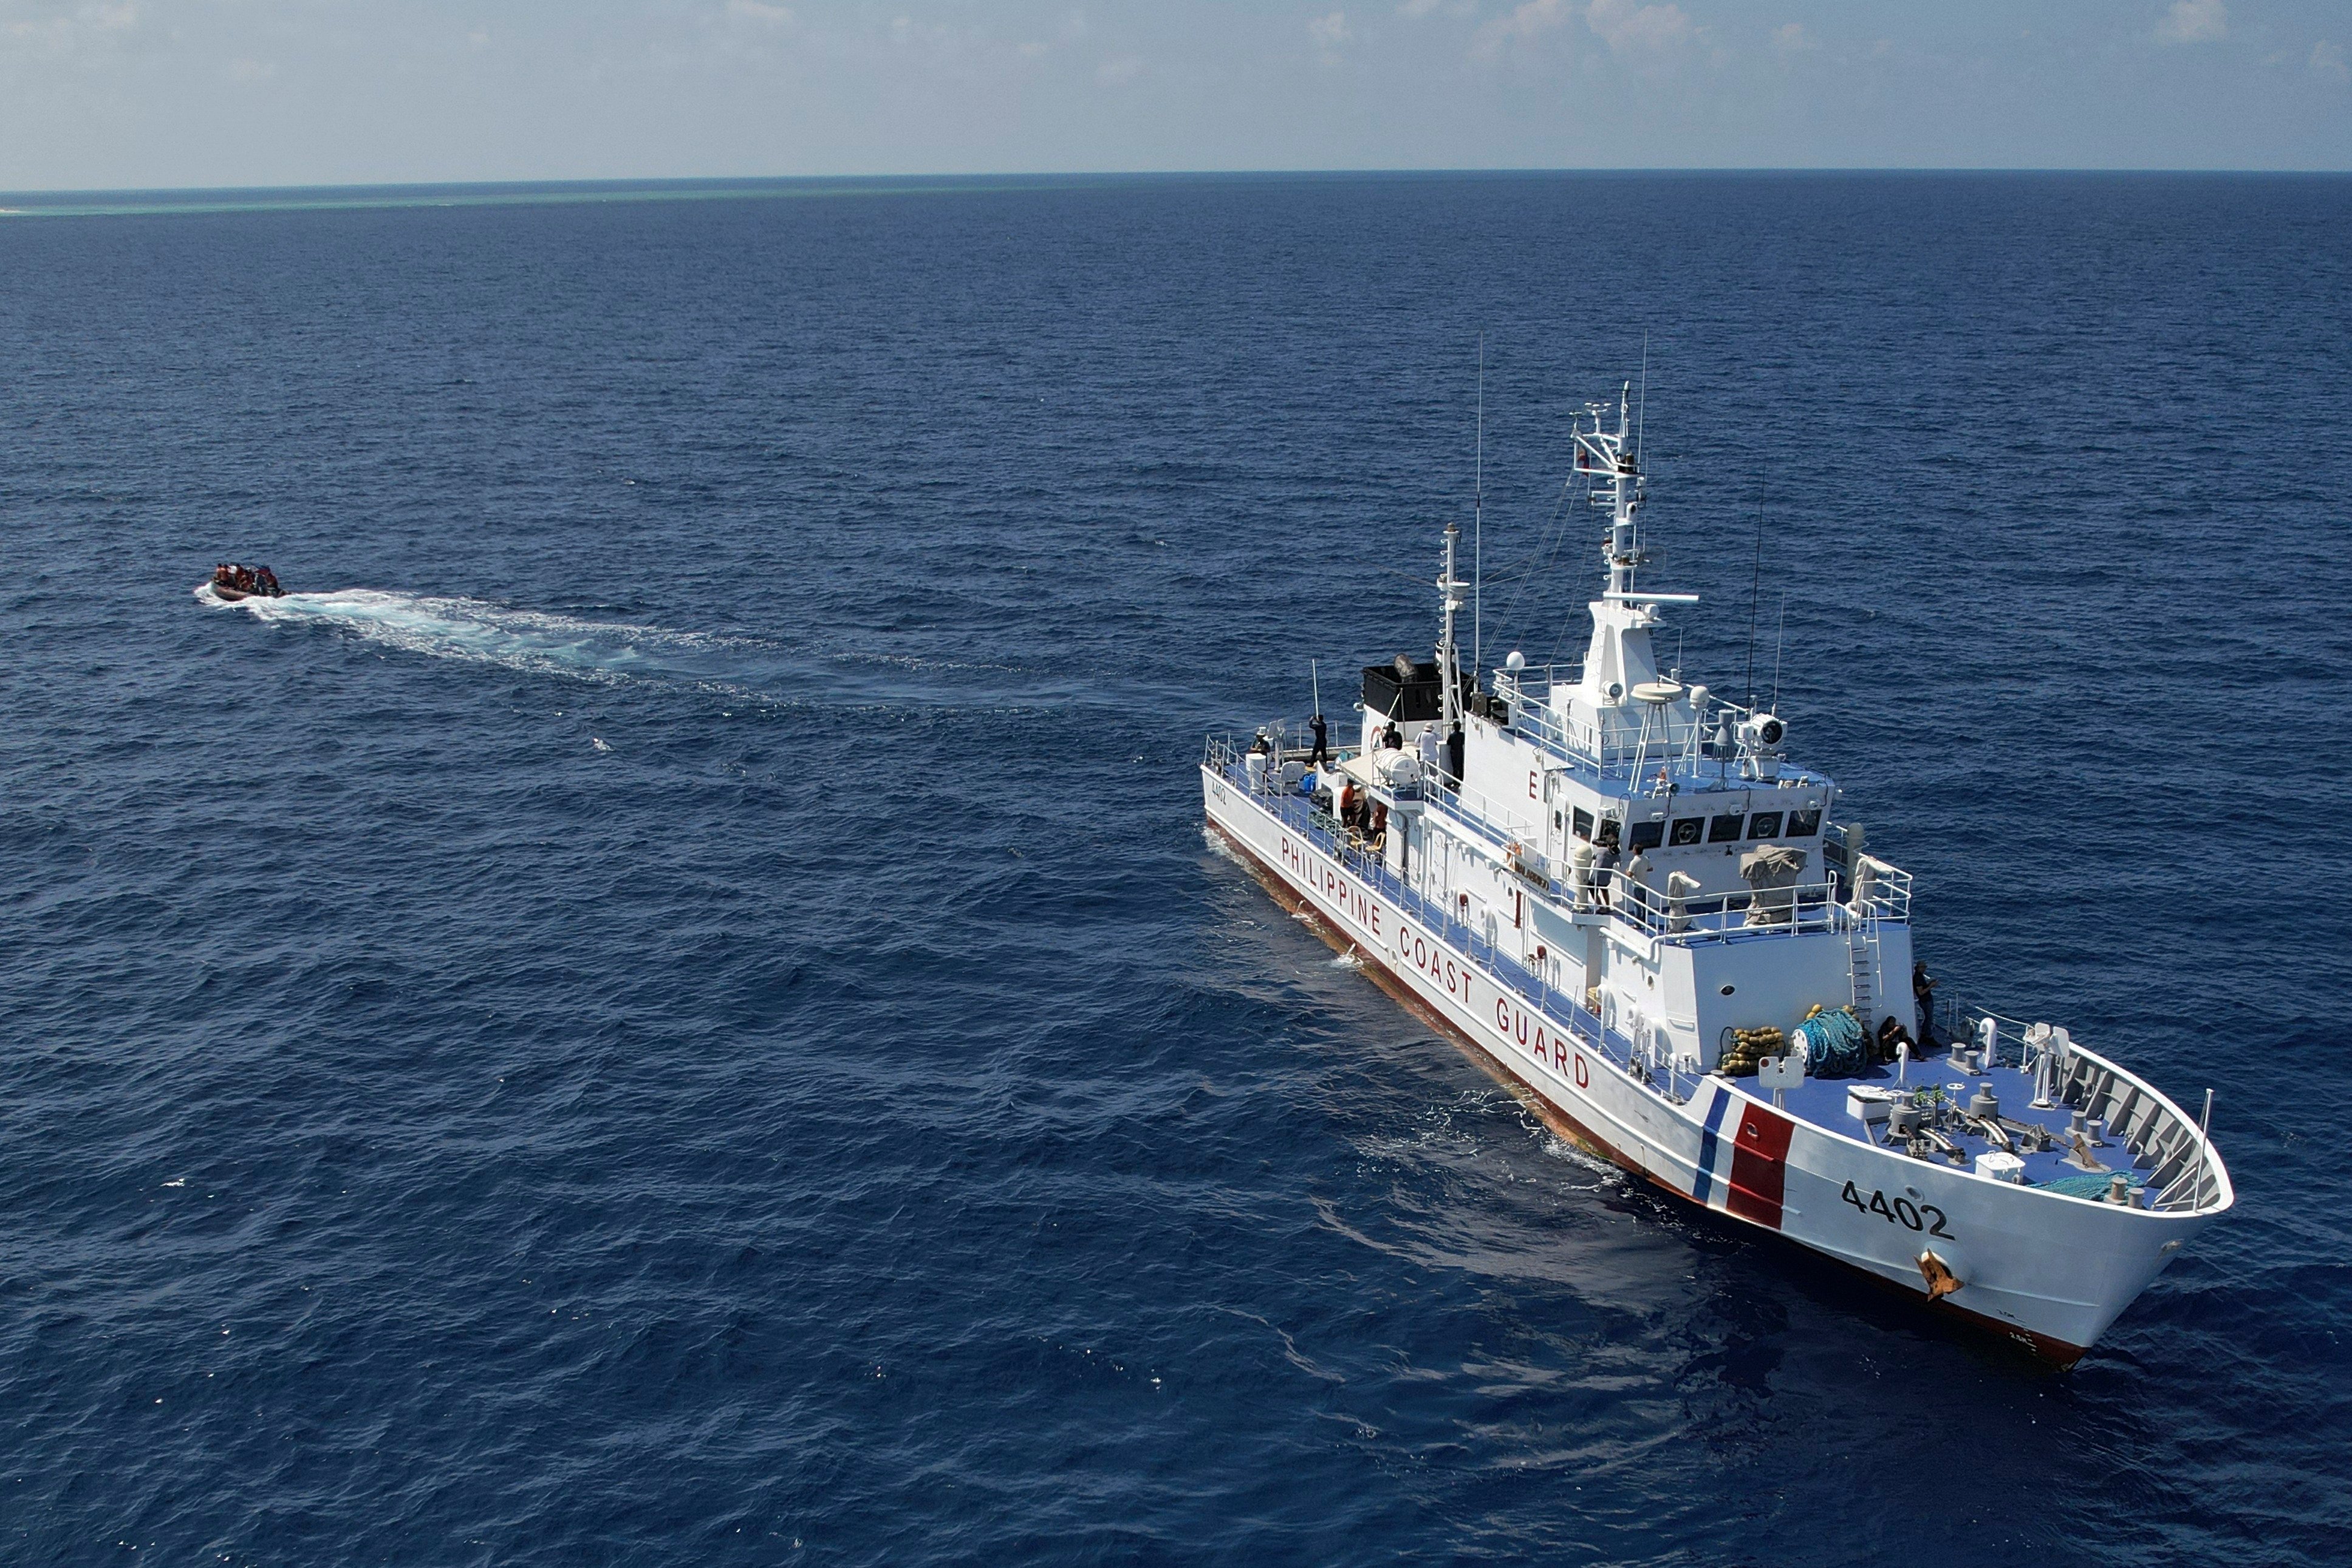 A Philippine Coast Guard vessel at the Spratly Islands, which is called Nansha Qundao in pinyin. China’s foreign ministry and state media have been increasing the use of pinyin terms for disputed parts of the South China Sea as a way to reinforce China’s claims over the contested waterway. Photo: AP